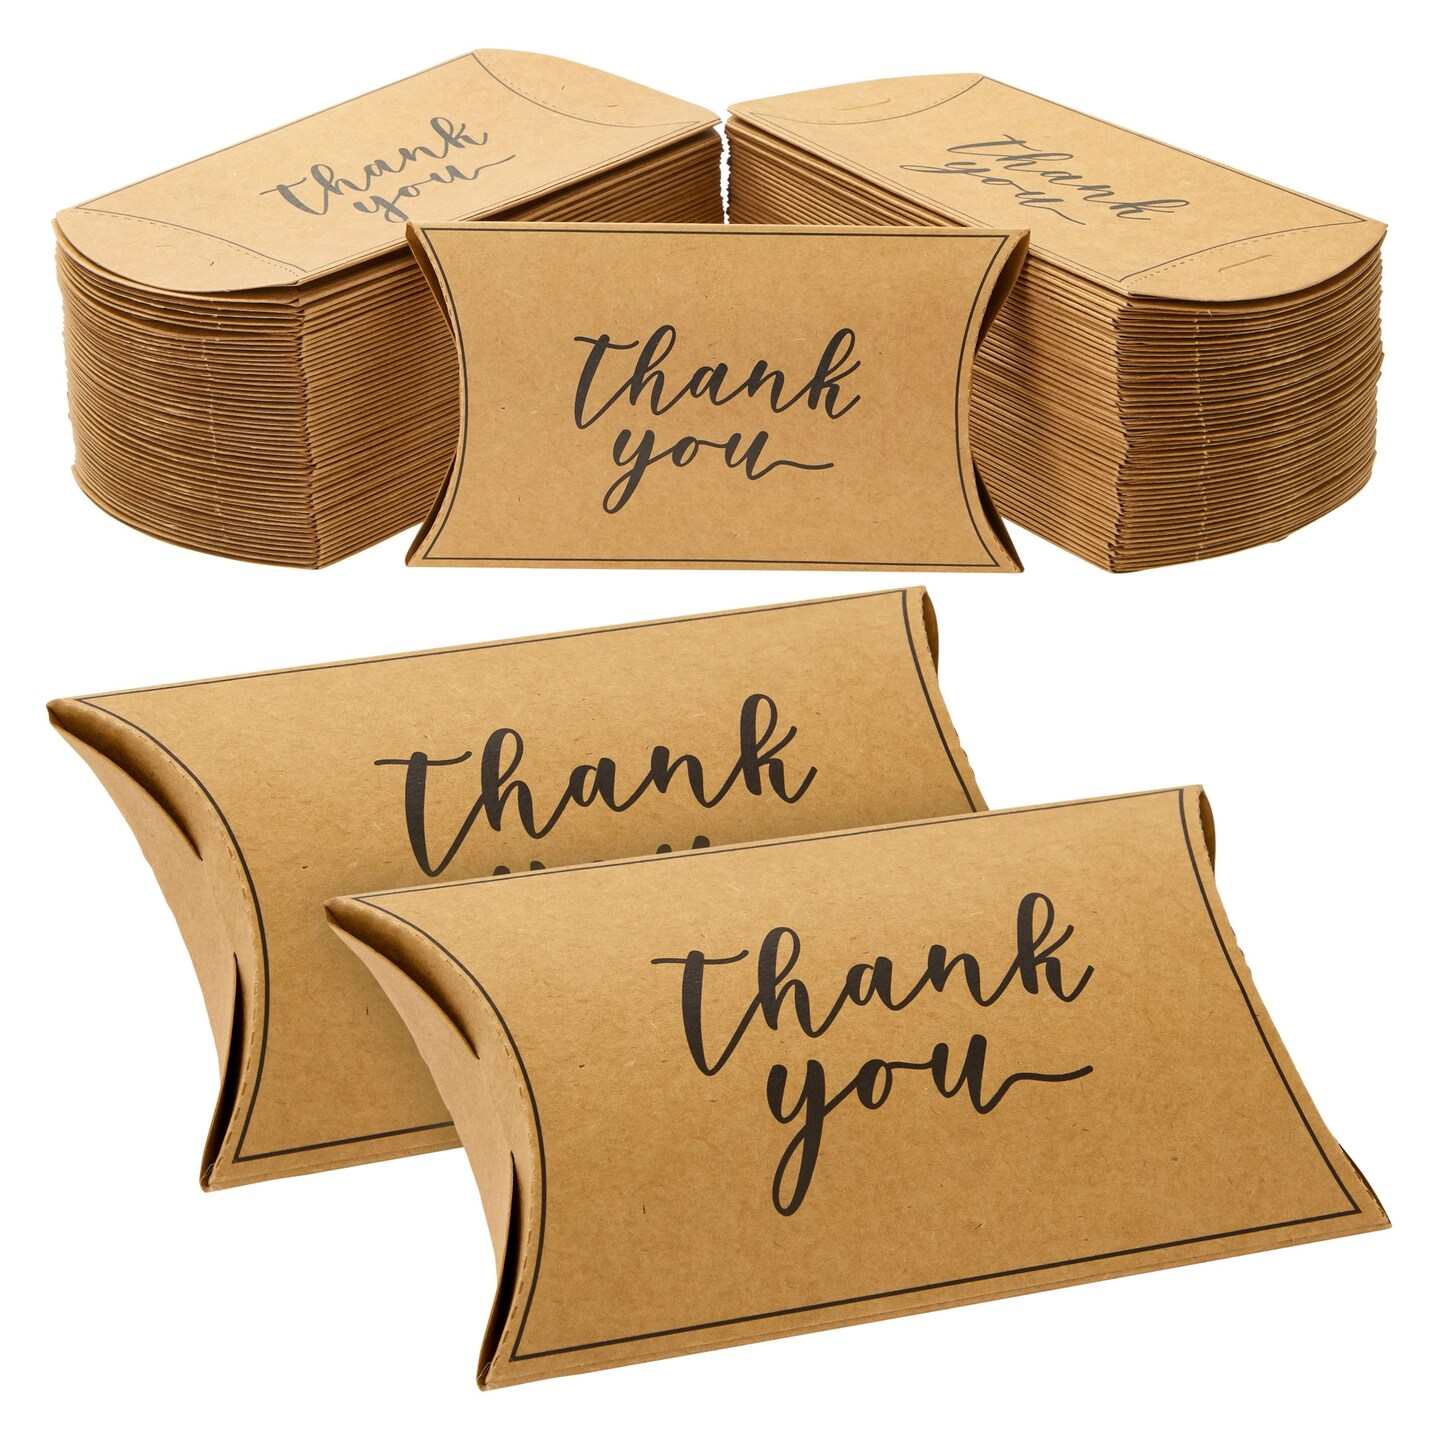 100-Pack Wedding Favor Pillow Boxes, Bulk 5.2x3.2-Inch Kraft Paper Thank You Gift Boxes for Party Favors (Brown with Black Script)